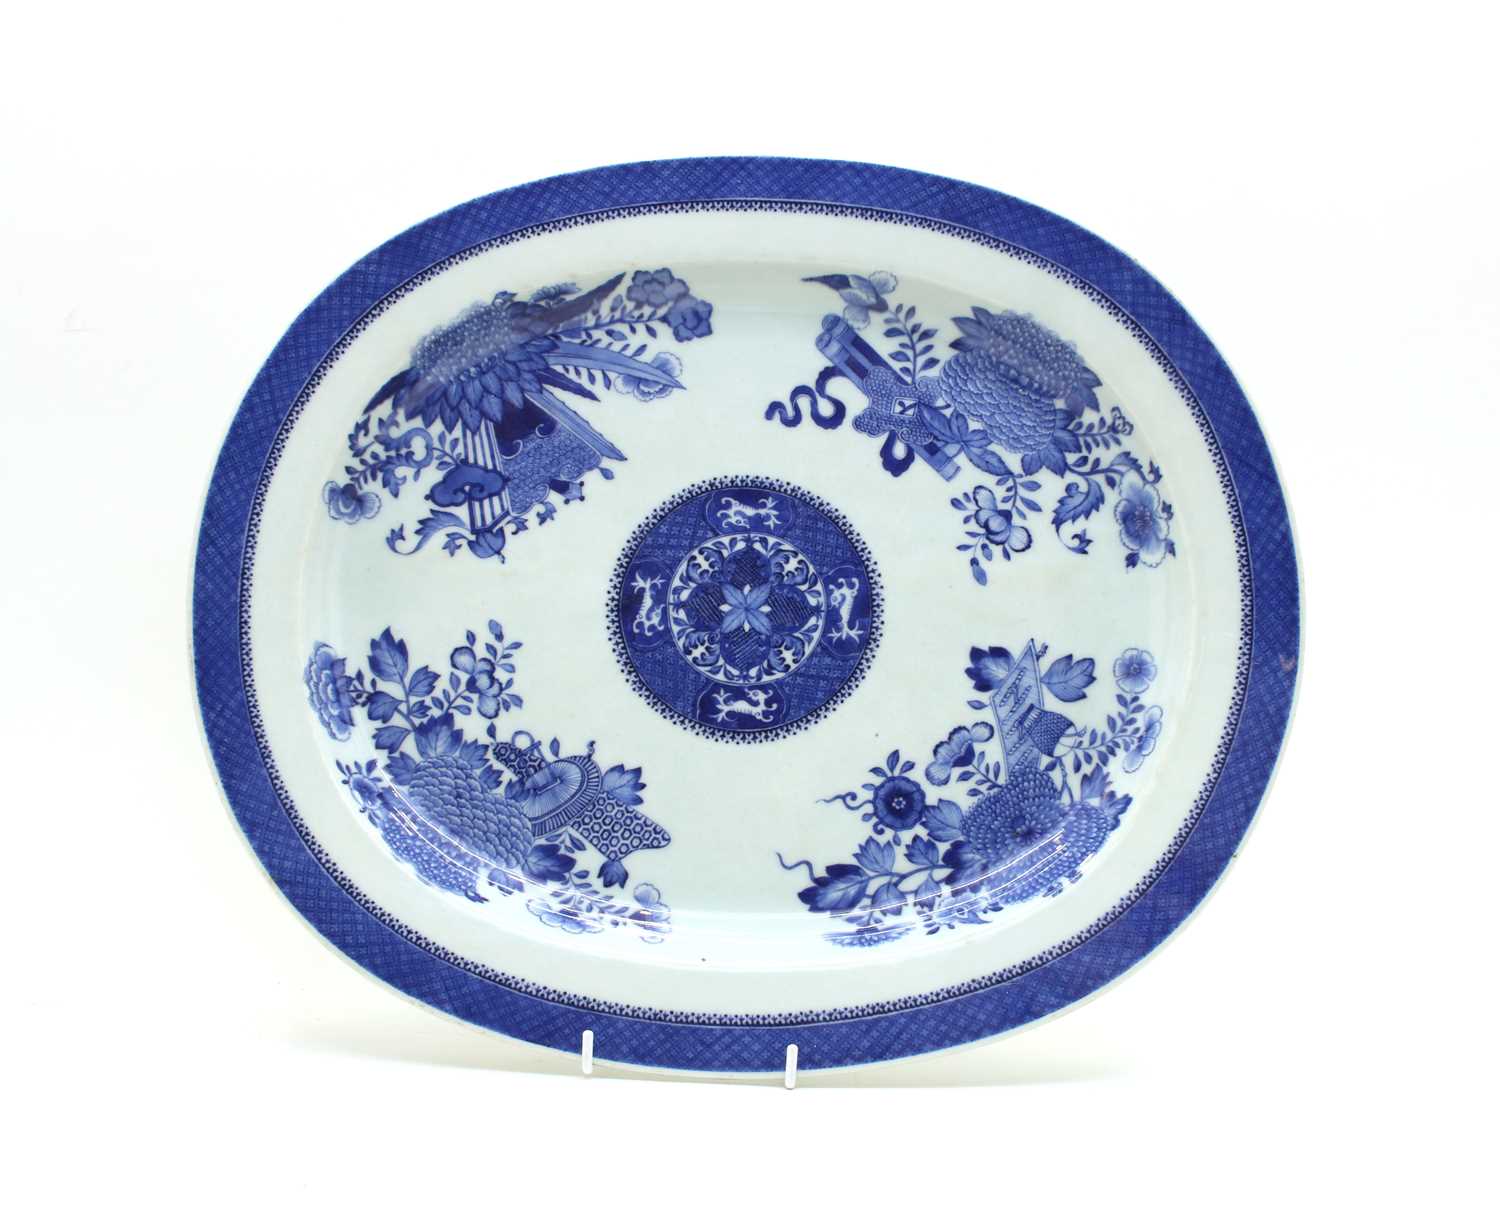 Lot 80 - A 19th century Chinese blue and white porcelain plate